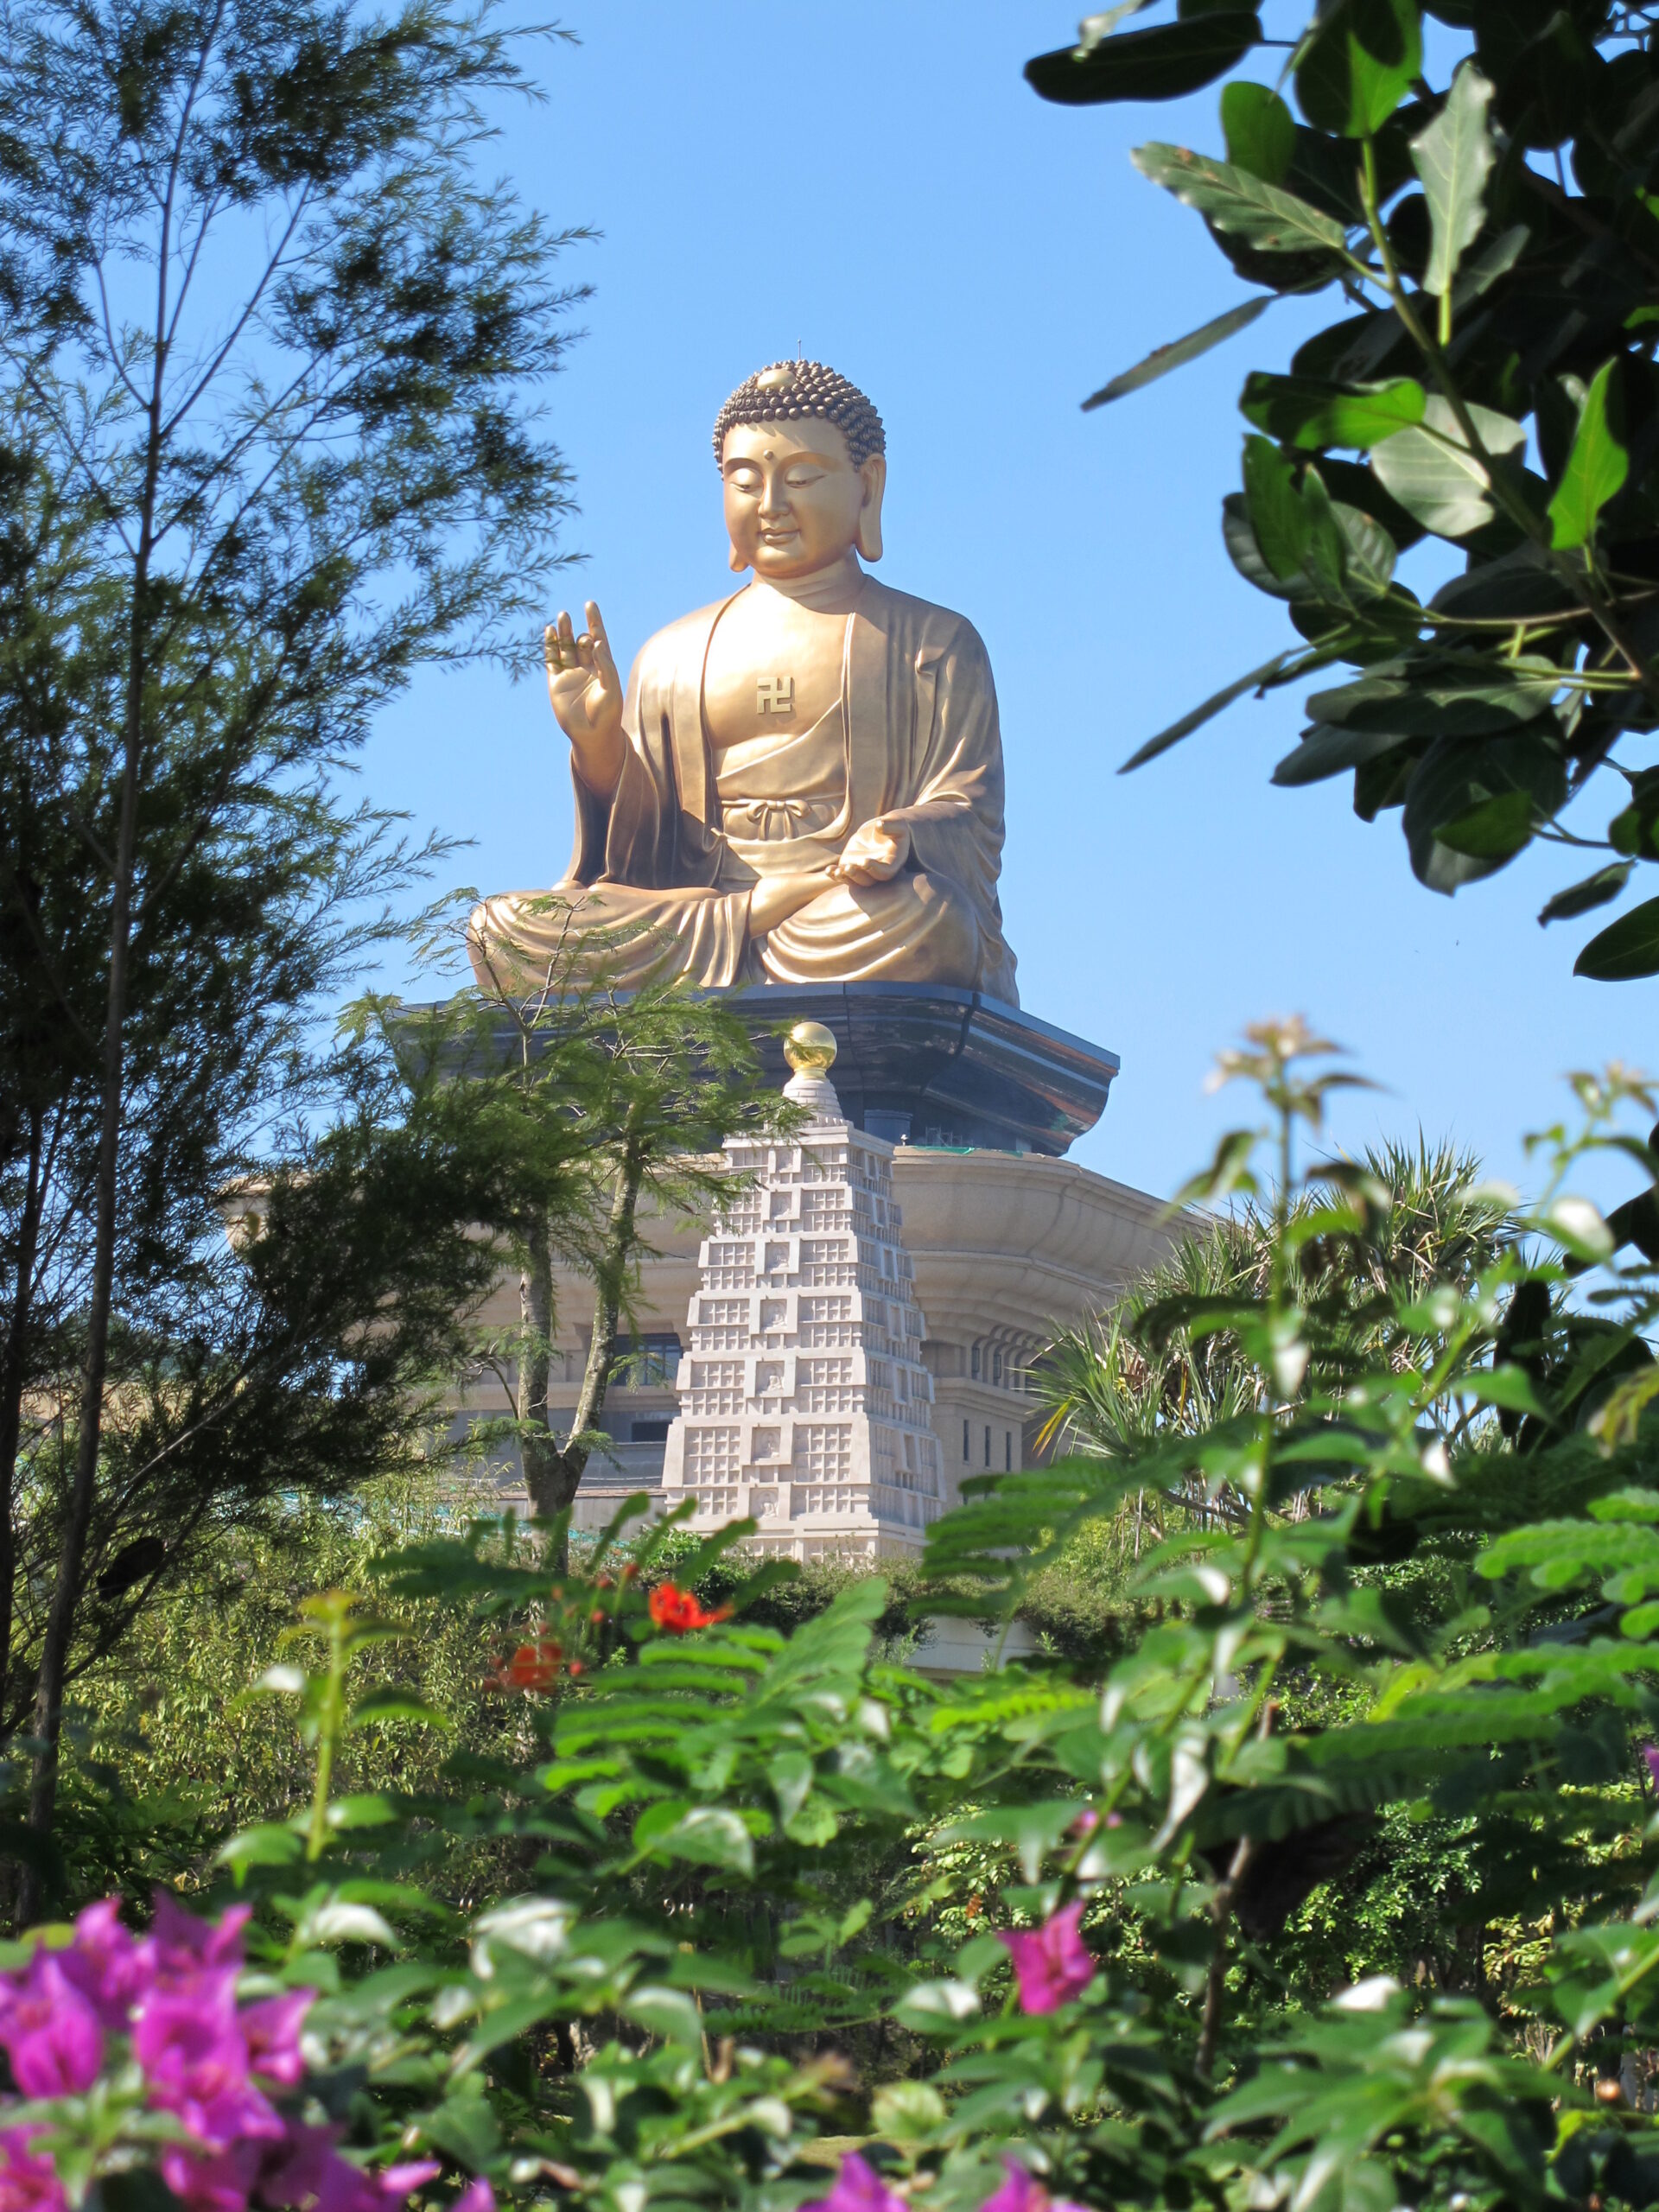 Part of the Fo Guang Shan Buddist complex